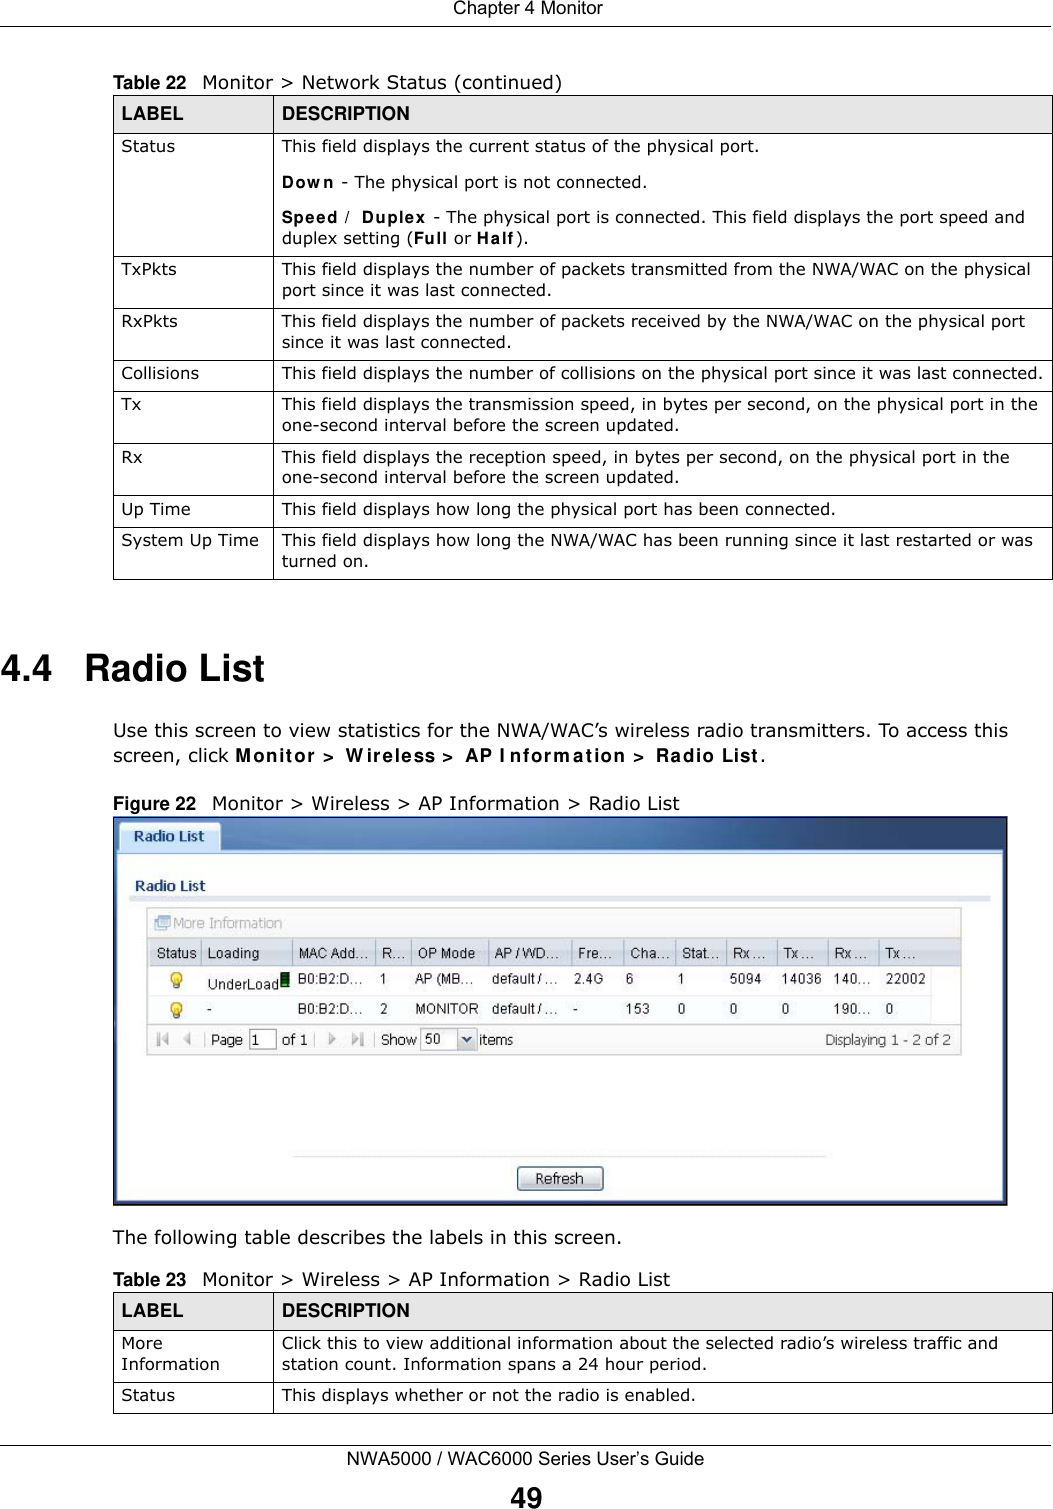  Chapter 4 MonitorNWA5000 / WAC6000 Series User’s Guide494.4   Radio List Use this screen to view statistics for the NWA/WAC’s wireless radio transmitters. To access this screen, click Monitor &gt;  W ire less &gt;  AP I nform a tion &gt;  Ra dio List .Figure 22   Monitor &gt; Wireless &gt; AP Information &gt; Radio List    The following table describes the labels in this screen. Status This field displays the current status of the physical port. Dow n - The physical port is not connected.Speed /  Duplex - The physical port is connected. This field displays the port speed and duplex setting (Full or H alf ).TxPkts This field displays the number of packets transmitted from the NWA/WAC on the physical port since it was last connected.RxPkts This field displays the number of packets received by the NWA/WAC on the physical port since it was last connected.Collisions This field displays the number of collisions on the physical port since it was last connected.Tx This field displays the transmission speed, in bytes per second, on the physical port in the one-second interval before the screen updated.Rx This field displays the reception speed, in bytes per second, on the physical port in the one-second interval before the screen updated.Up Time This field displays how long the physical port has been connected.System Up Time This field displays how long the NWA/WAC has been running since it last restarted or was turned on.Table 22   Monitor &gt; Network Status (continued)LABEL DESCRIPTIONTable 23   Monitor &gt; Wireless &gt; AP Information &gt; Radio ListLABEL DESCRIPTIONMore InformationClick this to view additional information about the selected radio’s wireless traffic and station count. Information spans a 24 hour period.Status This displays whether or not the radio is enabled.